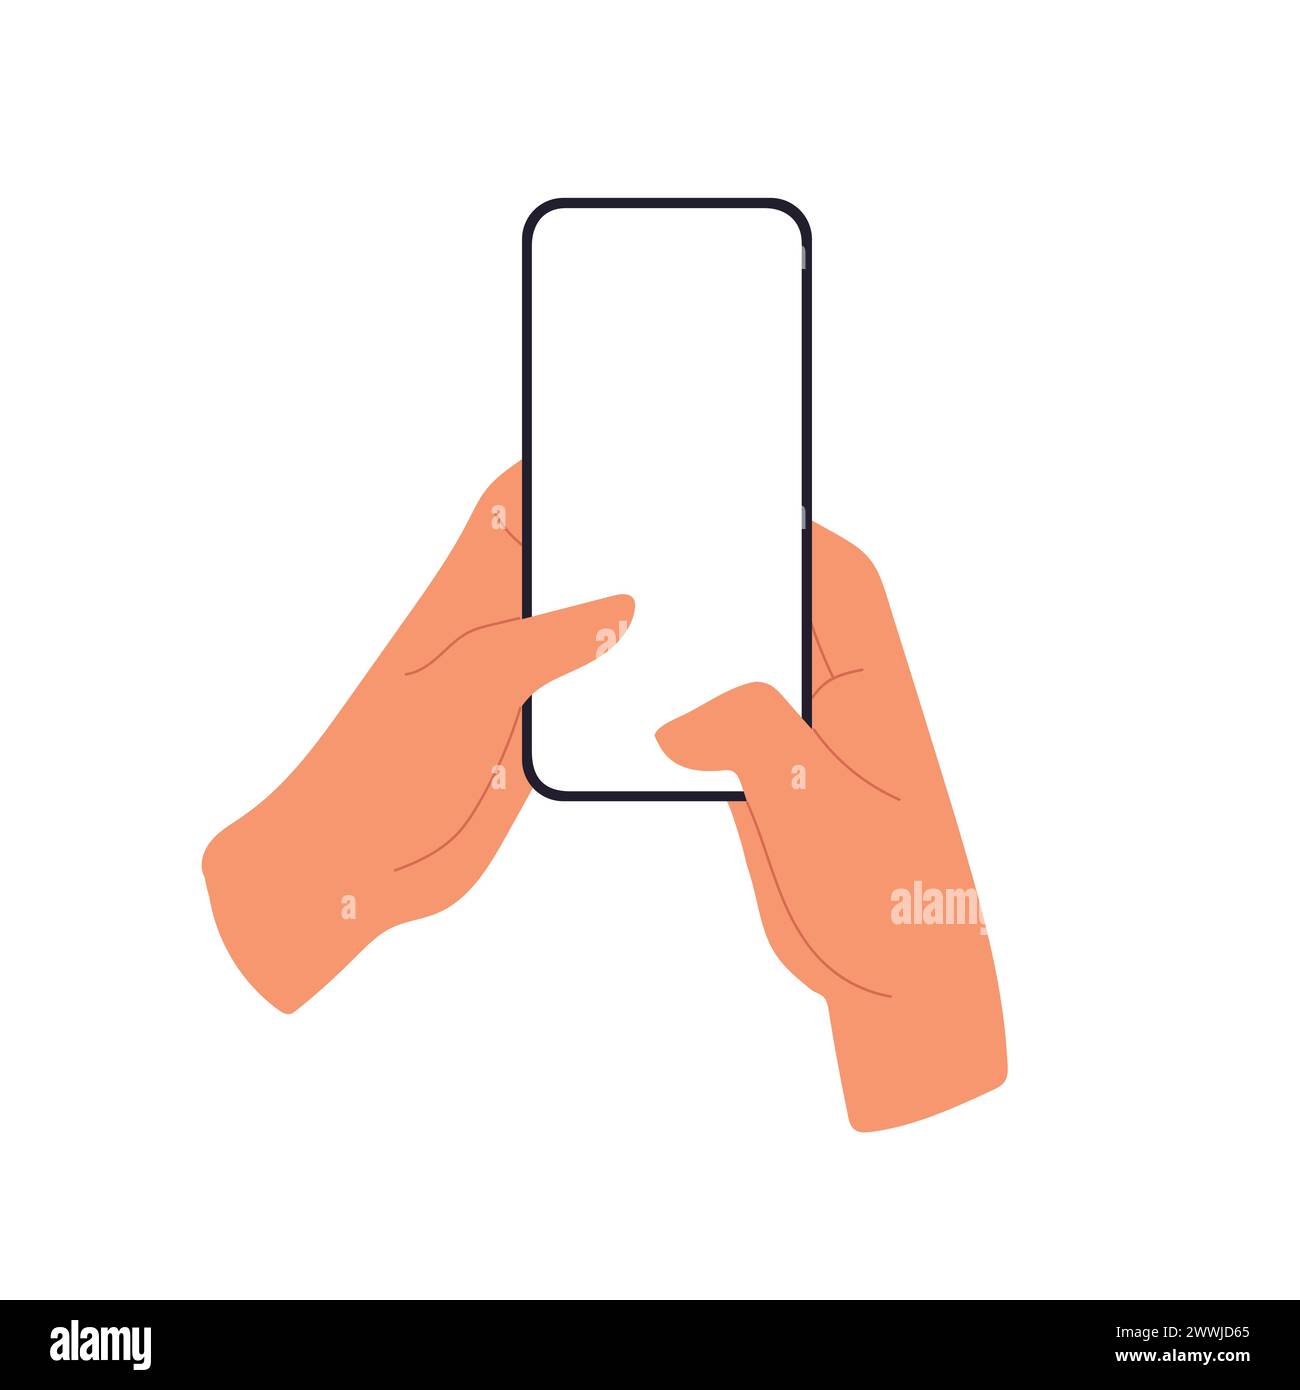 Hands texting on mobile phone screen mockup. Two thumbs tapping on smartphone display. Flat vector illustration isolated on white. Stock Vector